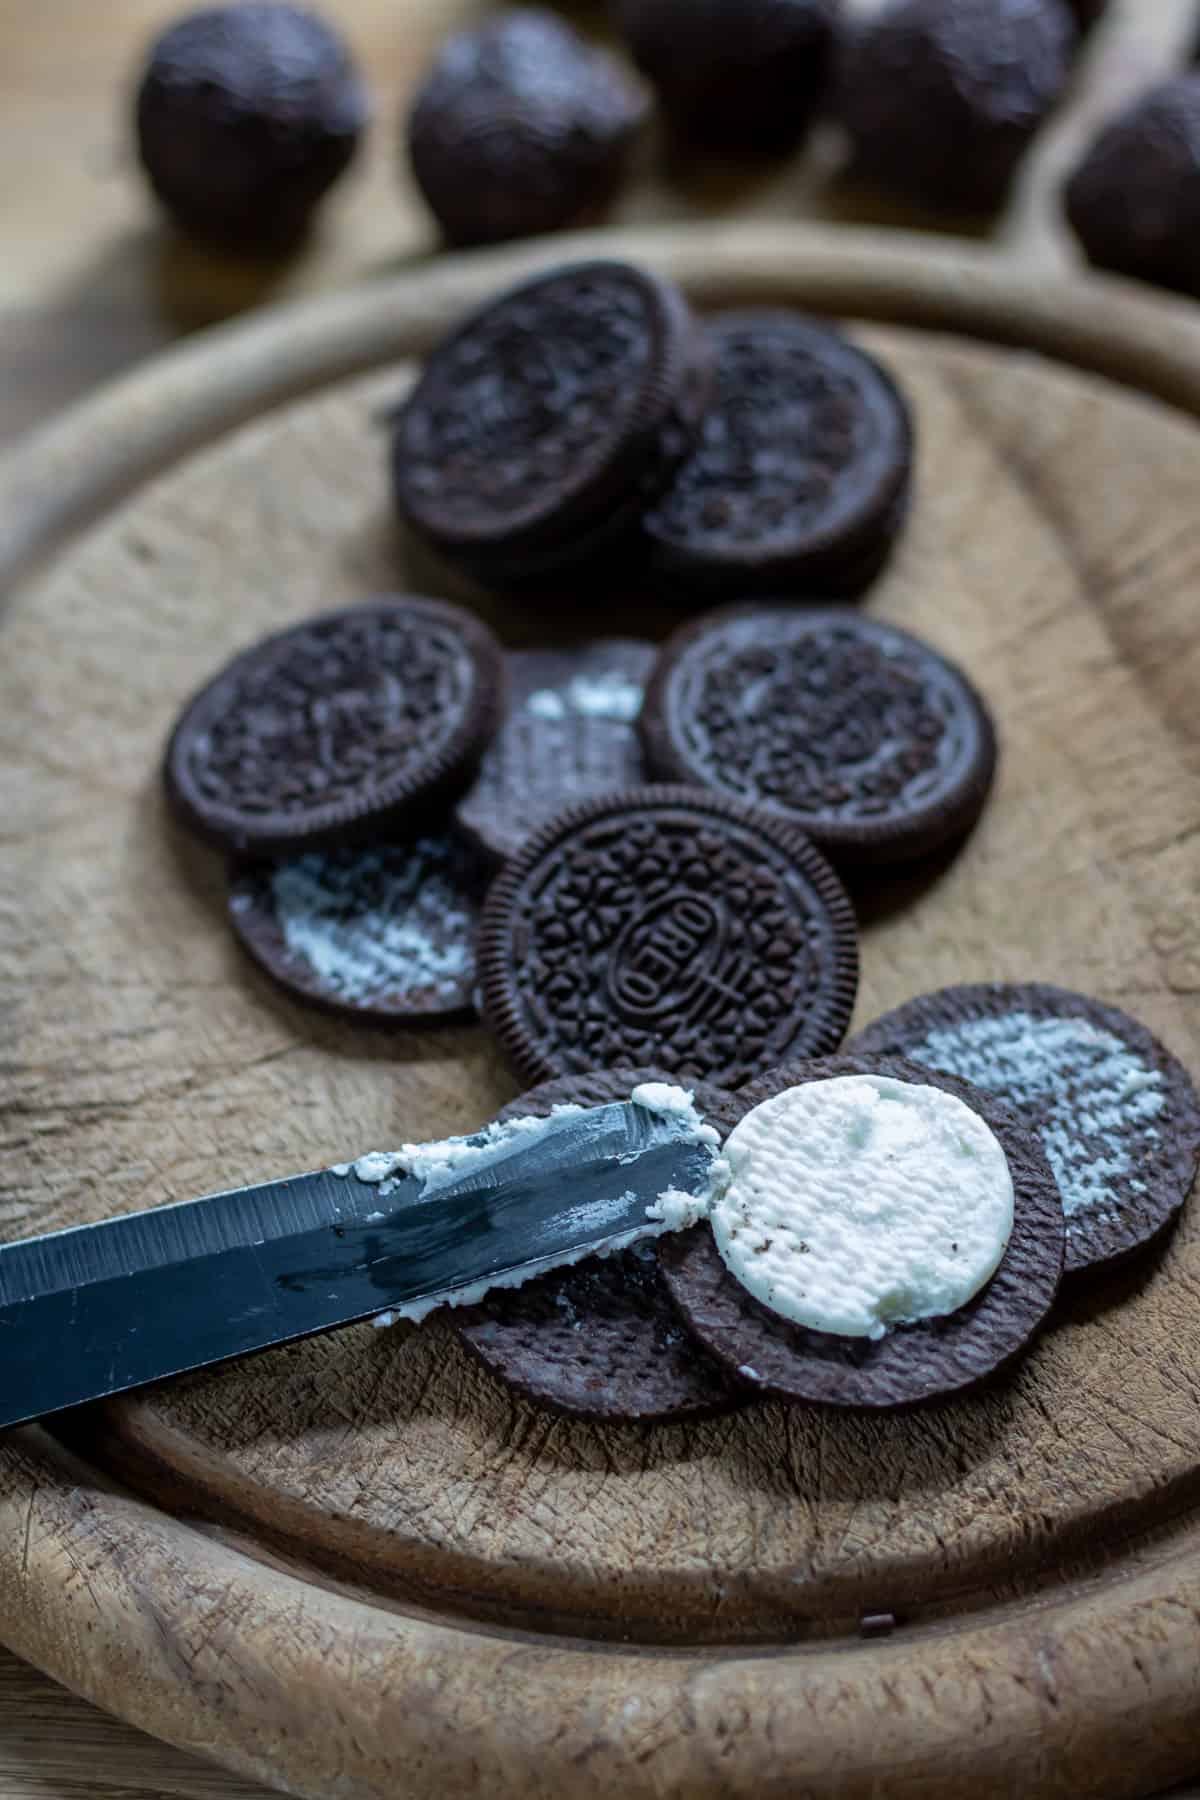 Scraping the filling out of oreos.